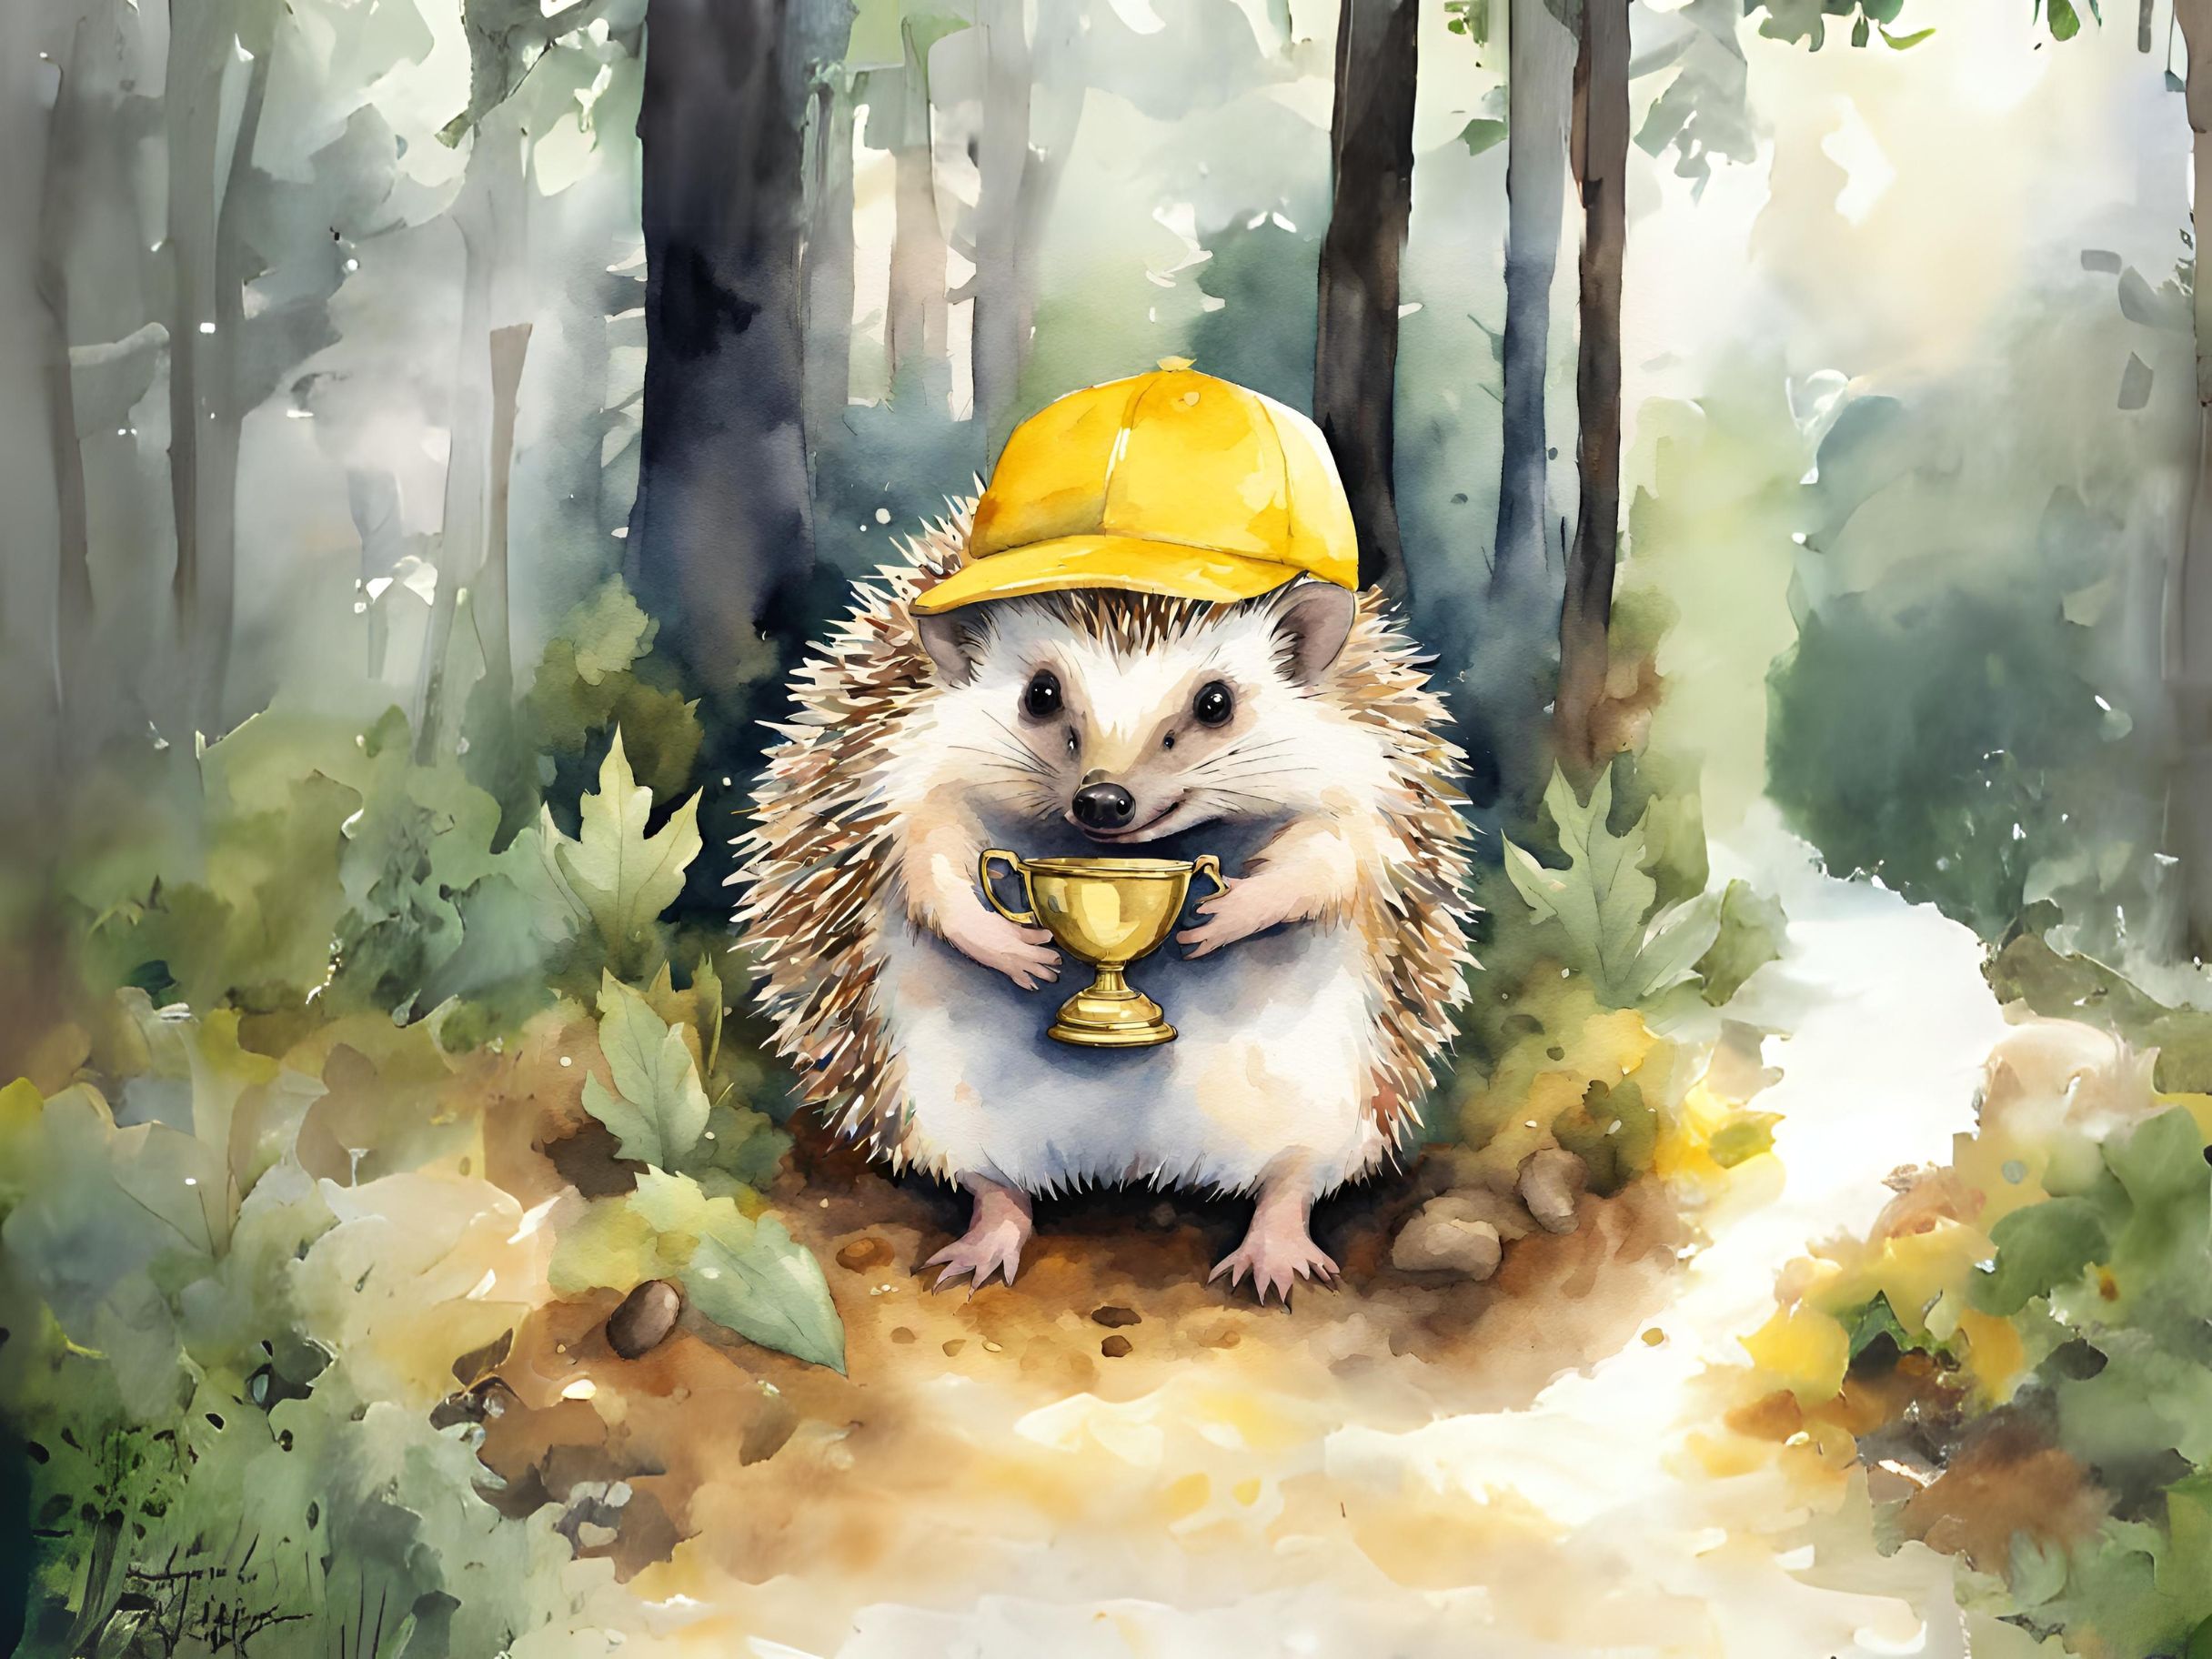 ​​“B-rrr-rrr! Why is it so cold today?” said Clever Hedgehog, opening his eyes as he woke up. 